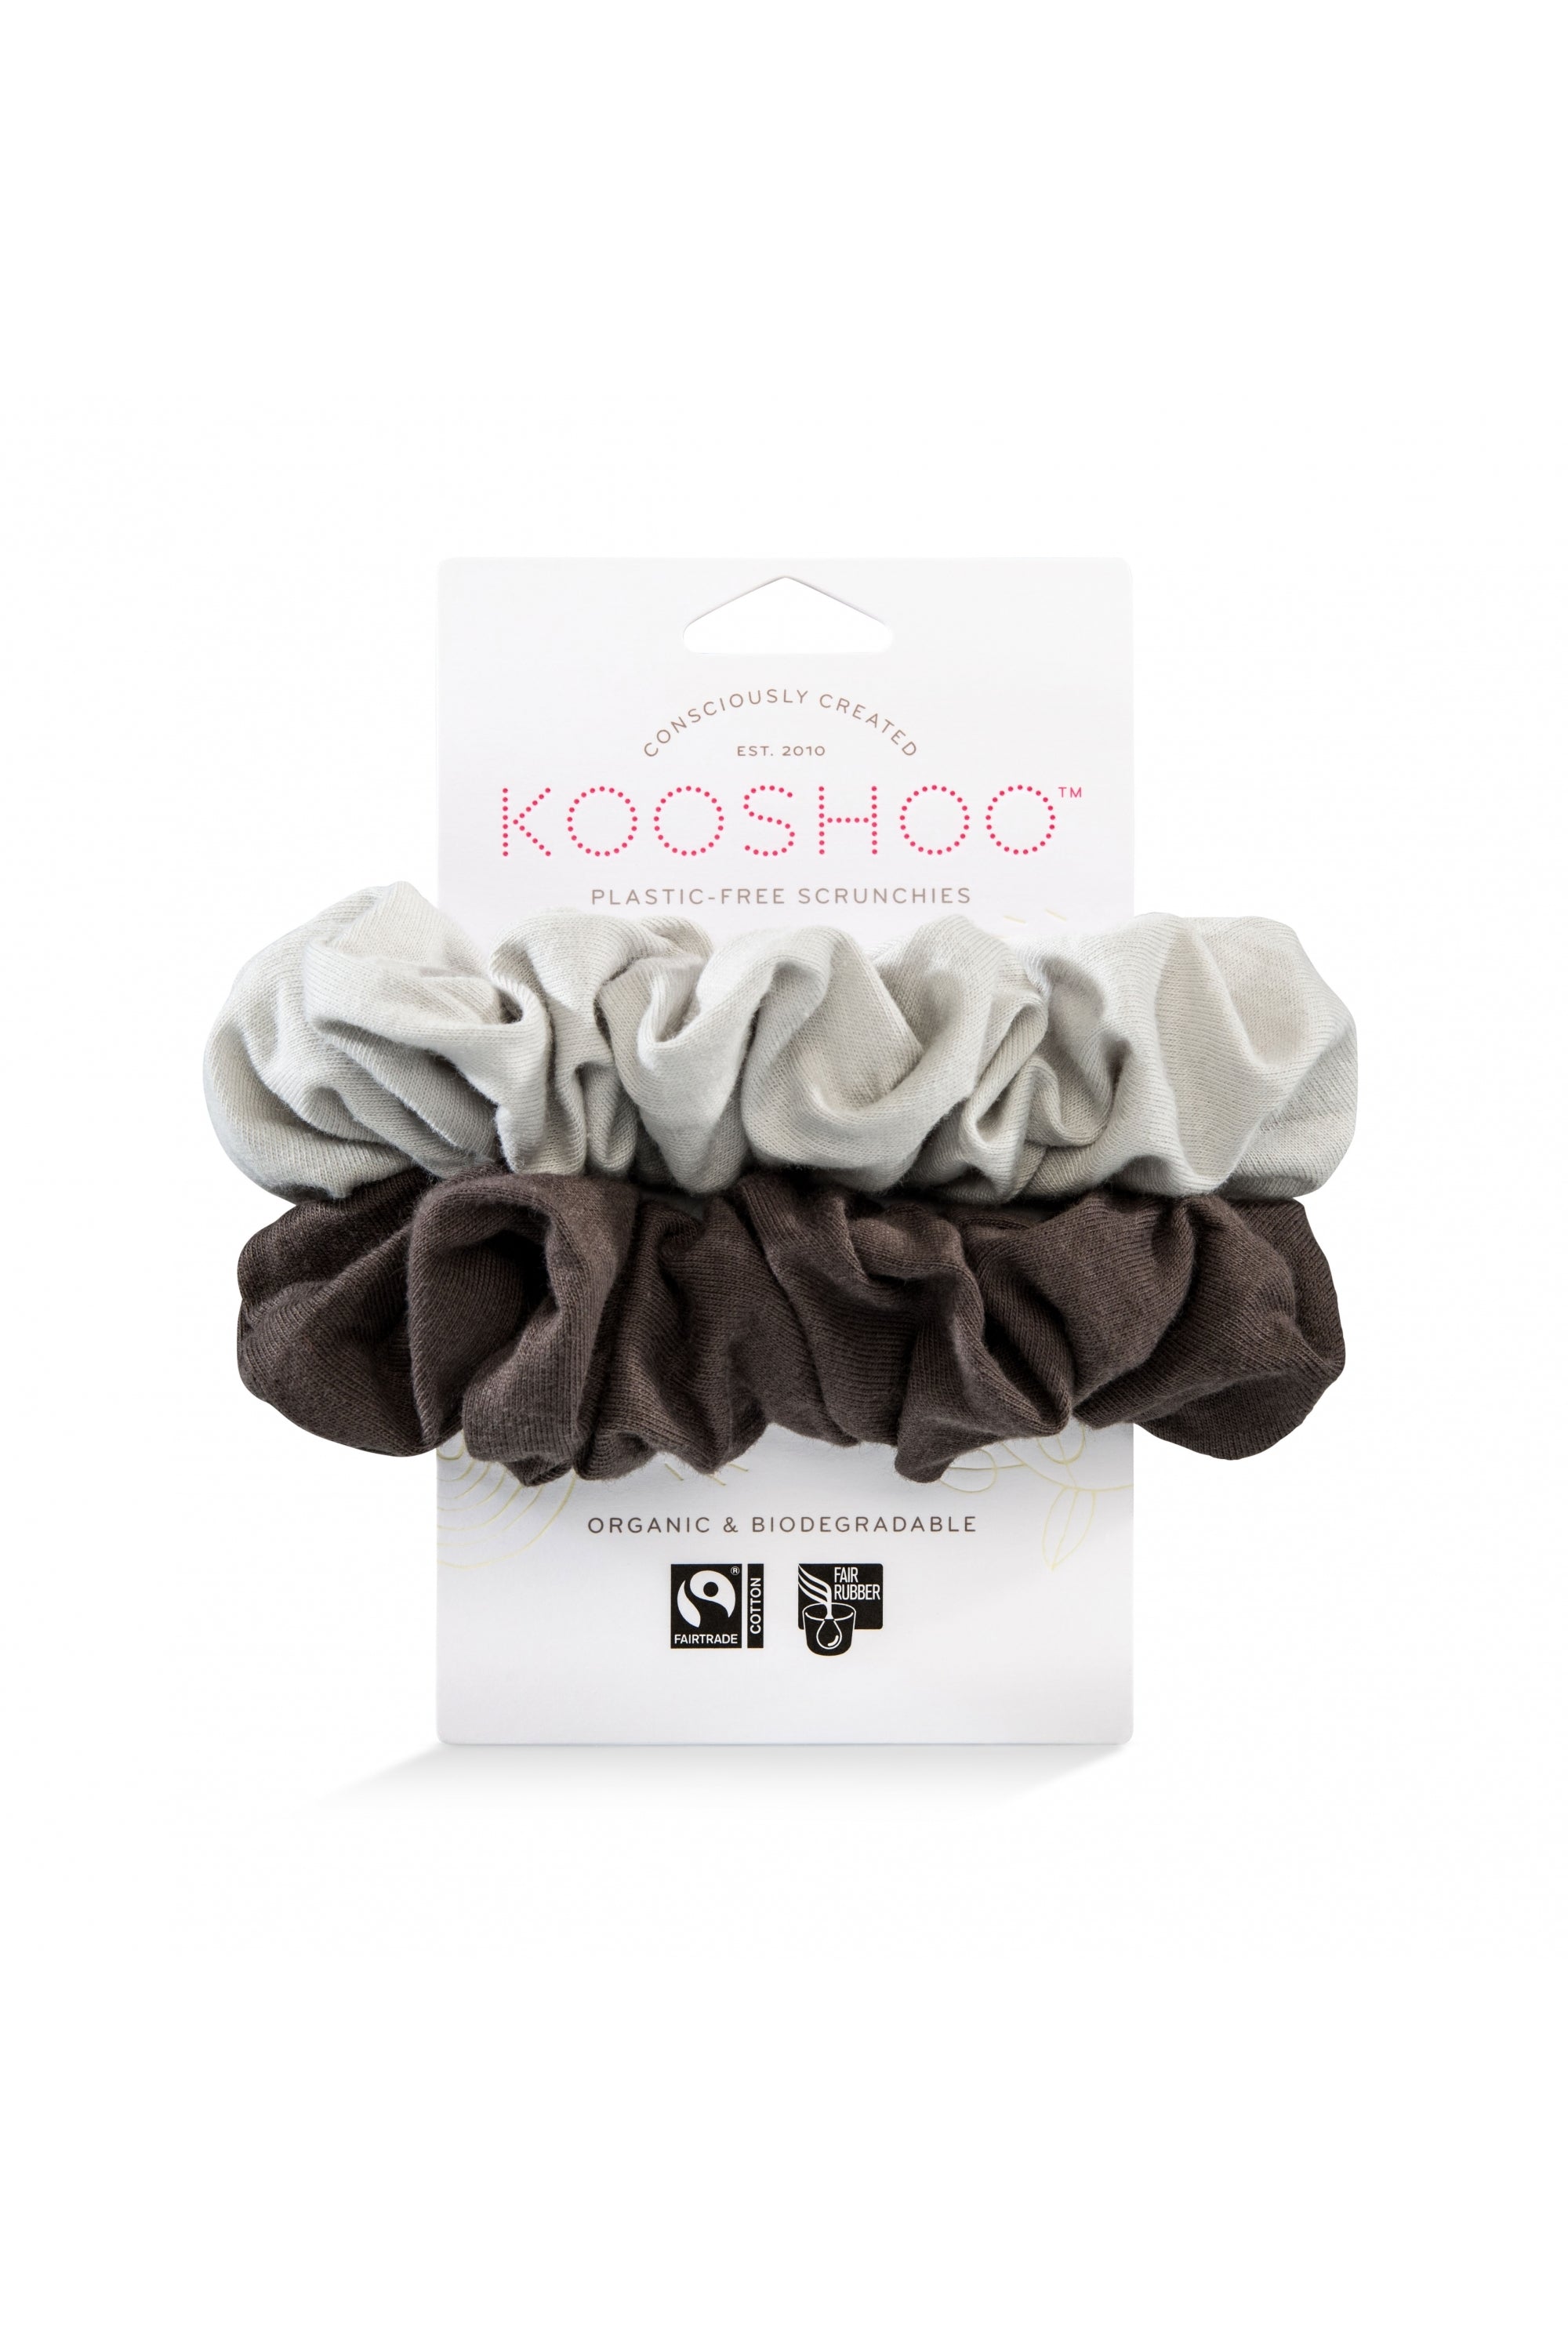 Modern eco-friendly scrunchies with an '80s nod. Made from 100% fair trade, biodegradable materials. Soft organic cotton exterior, plastic-free inner elastic for comfortable, secure hold. Stylish and sustainable accessory in white and beige, suitable from workouts to outings.